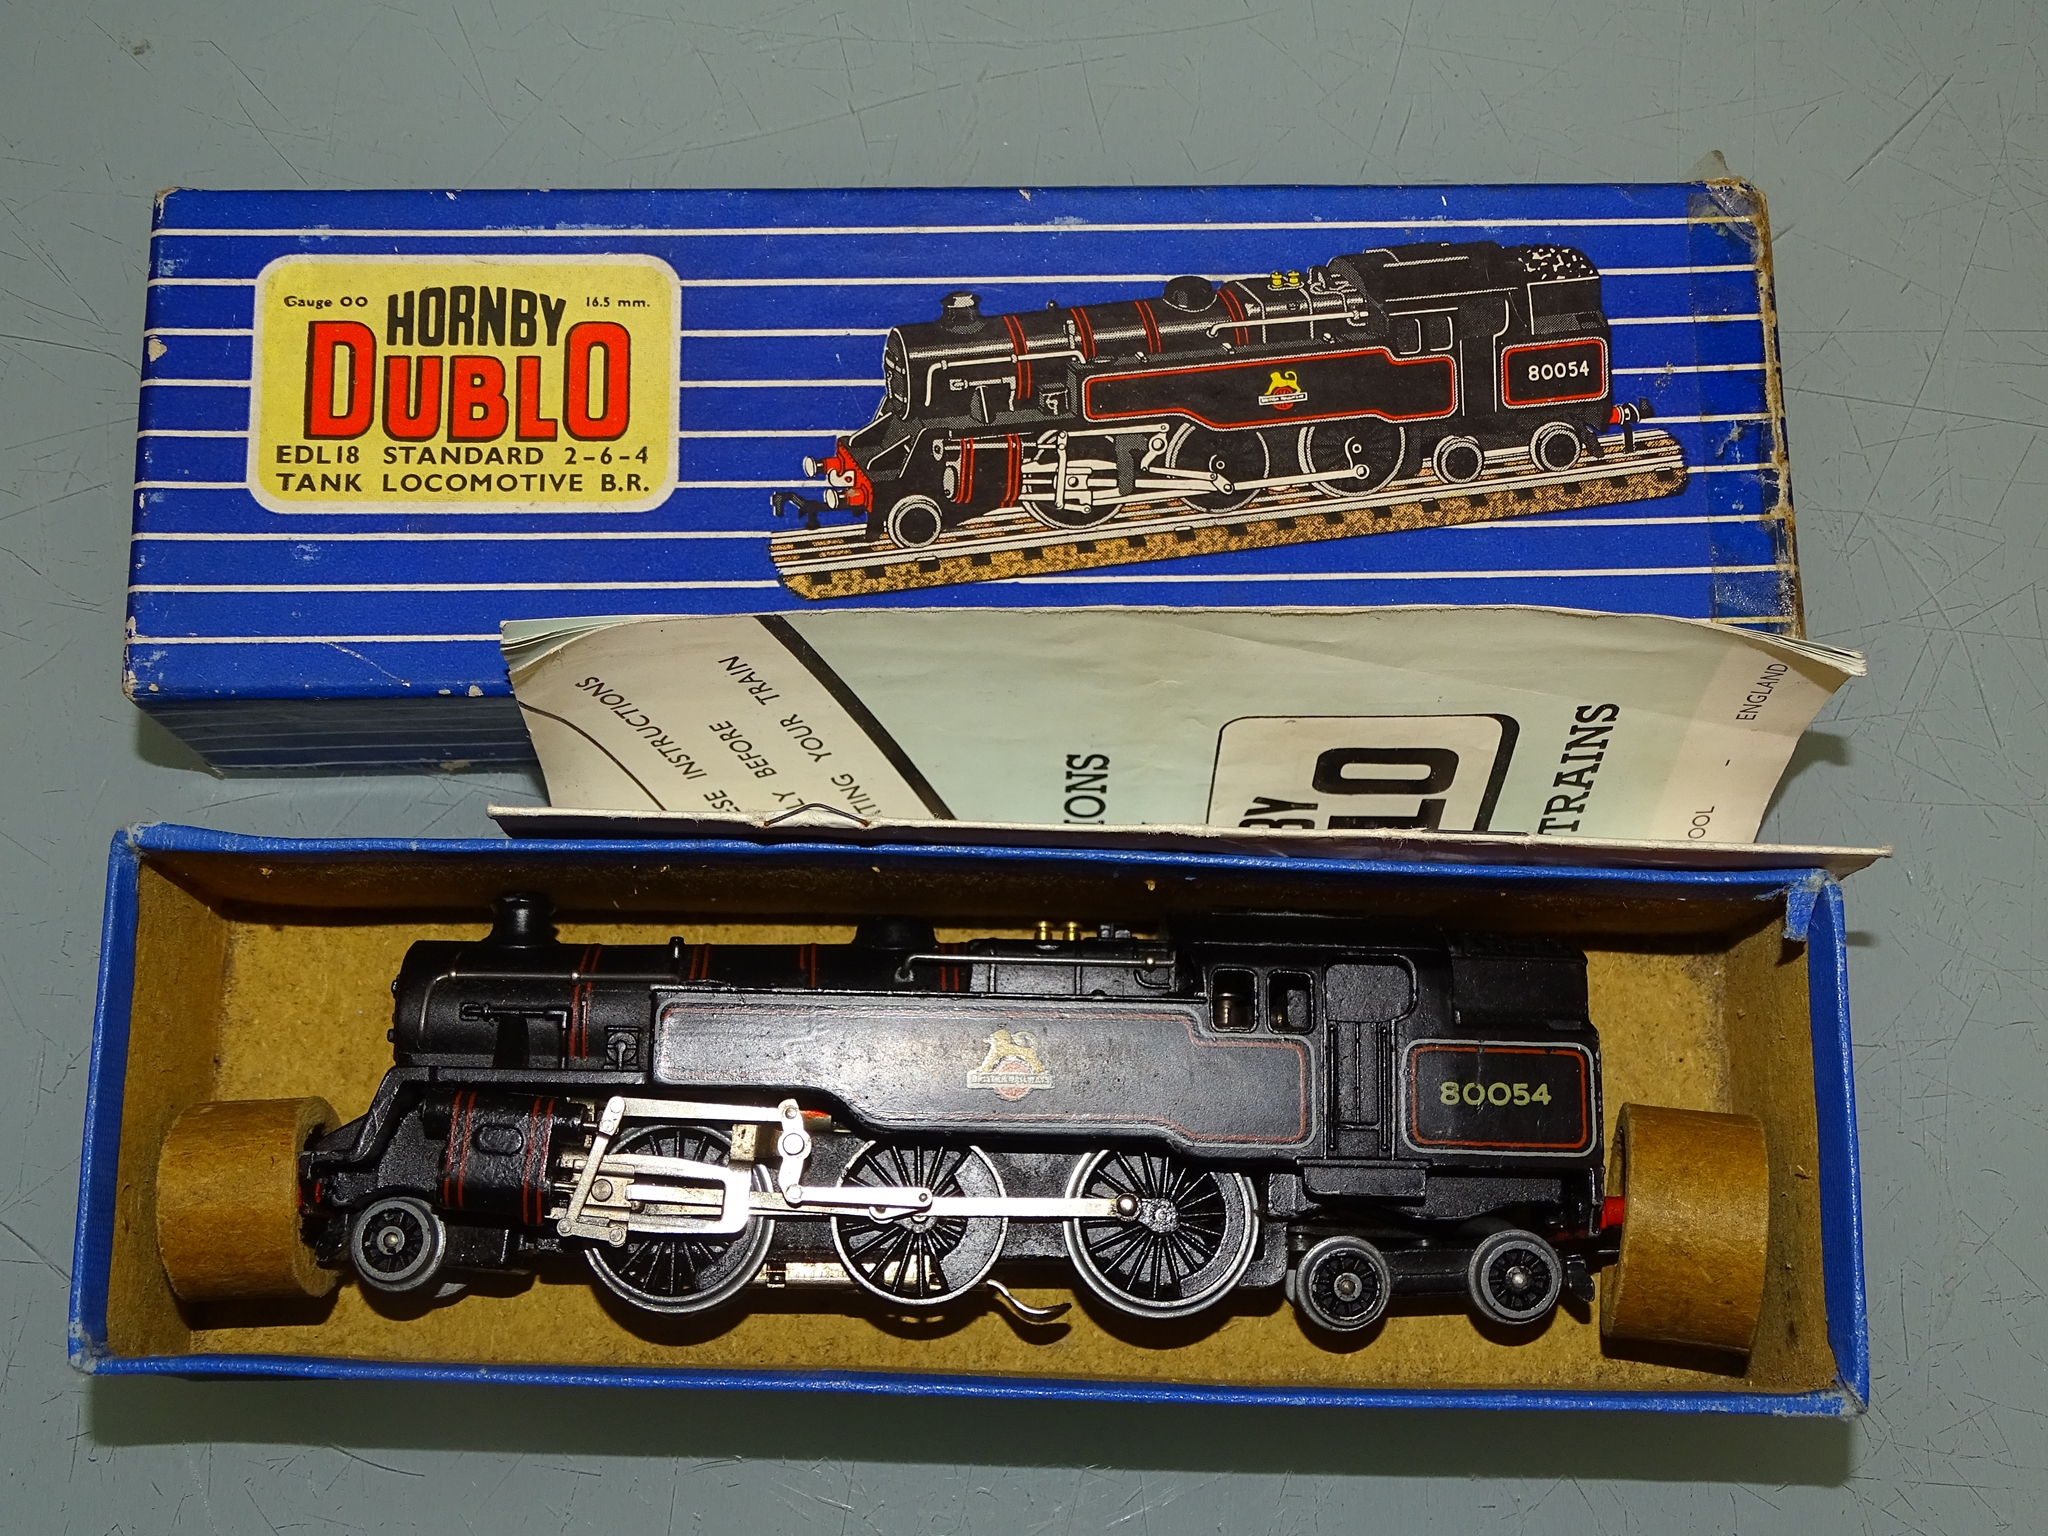 A HORNBY DUBLO 3 rail 2-6-4 EDL18 tank locomotive in BR black livery numbered 80054 - F/G in F